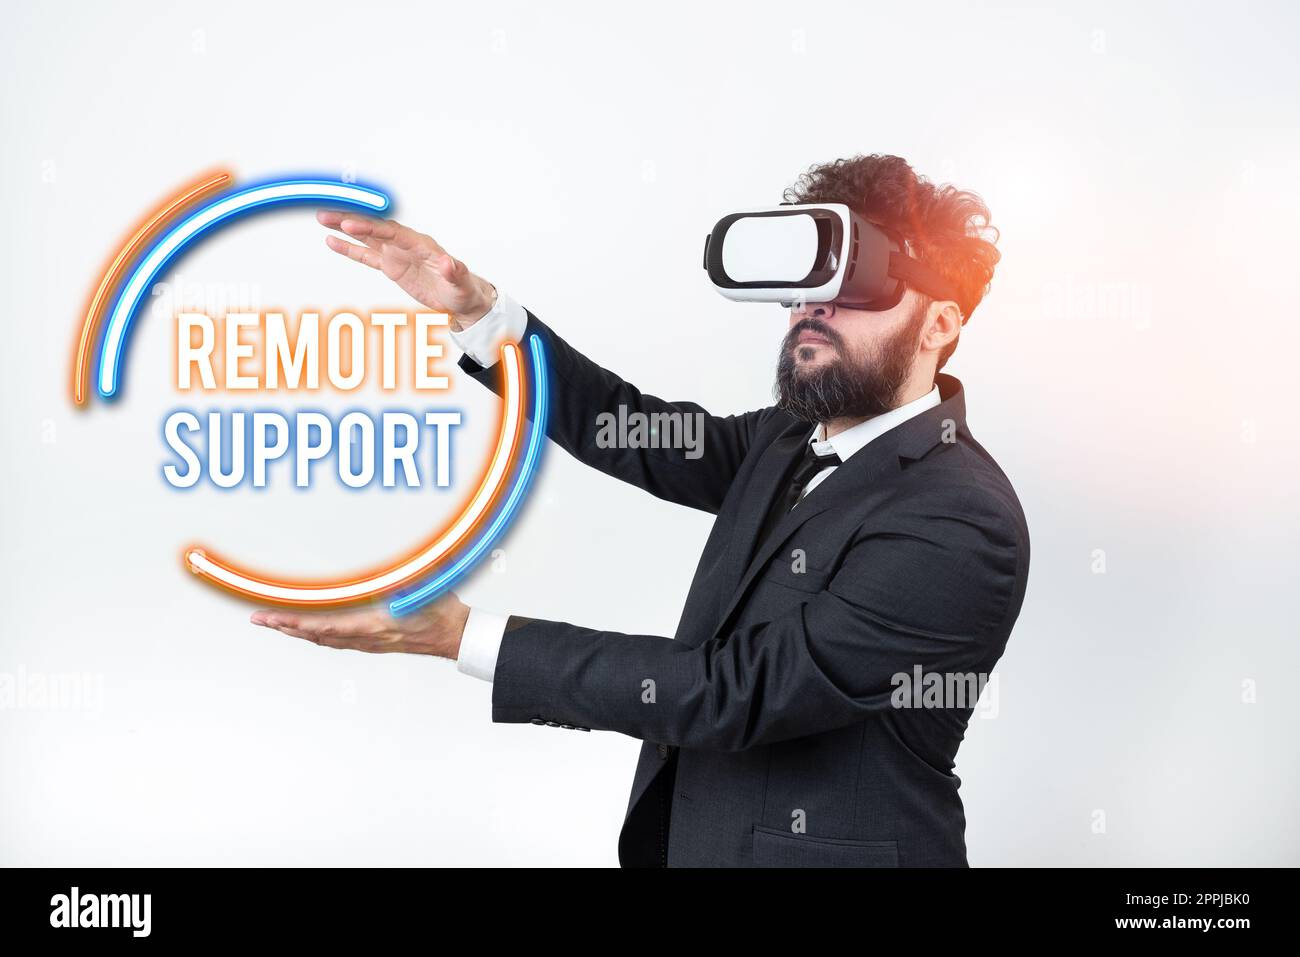 Inspiration showing sign Remote Support. Business overview help end-users to solve computer problems and issues remotely Stock Photo